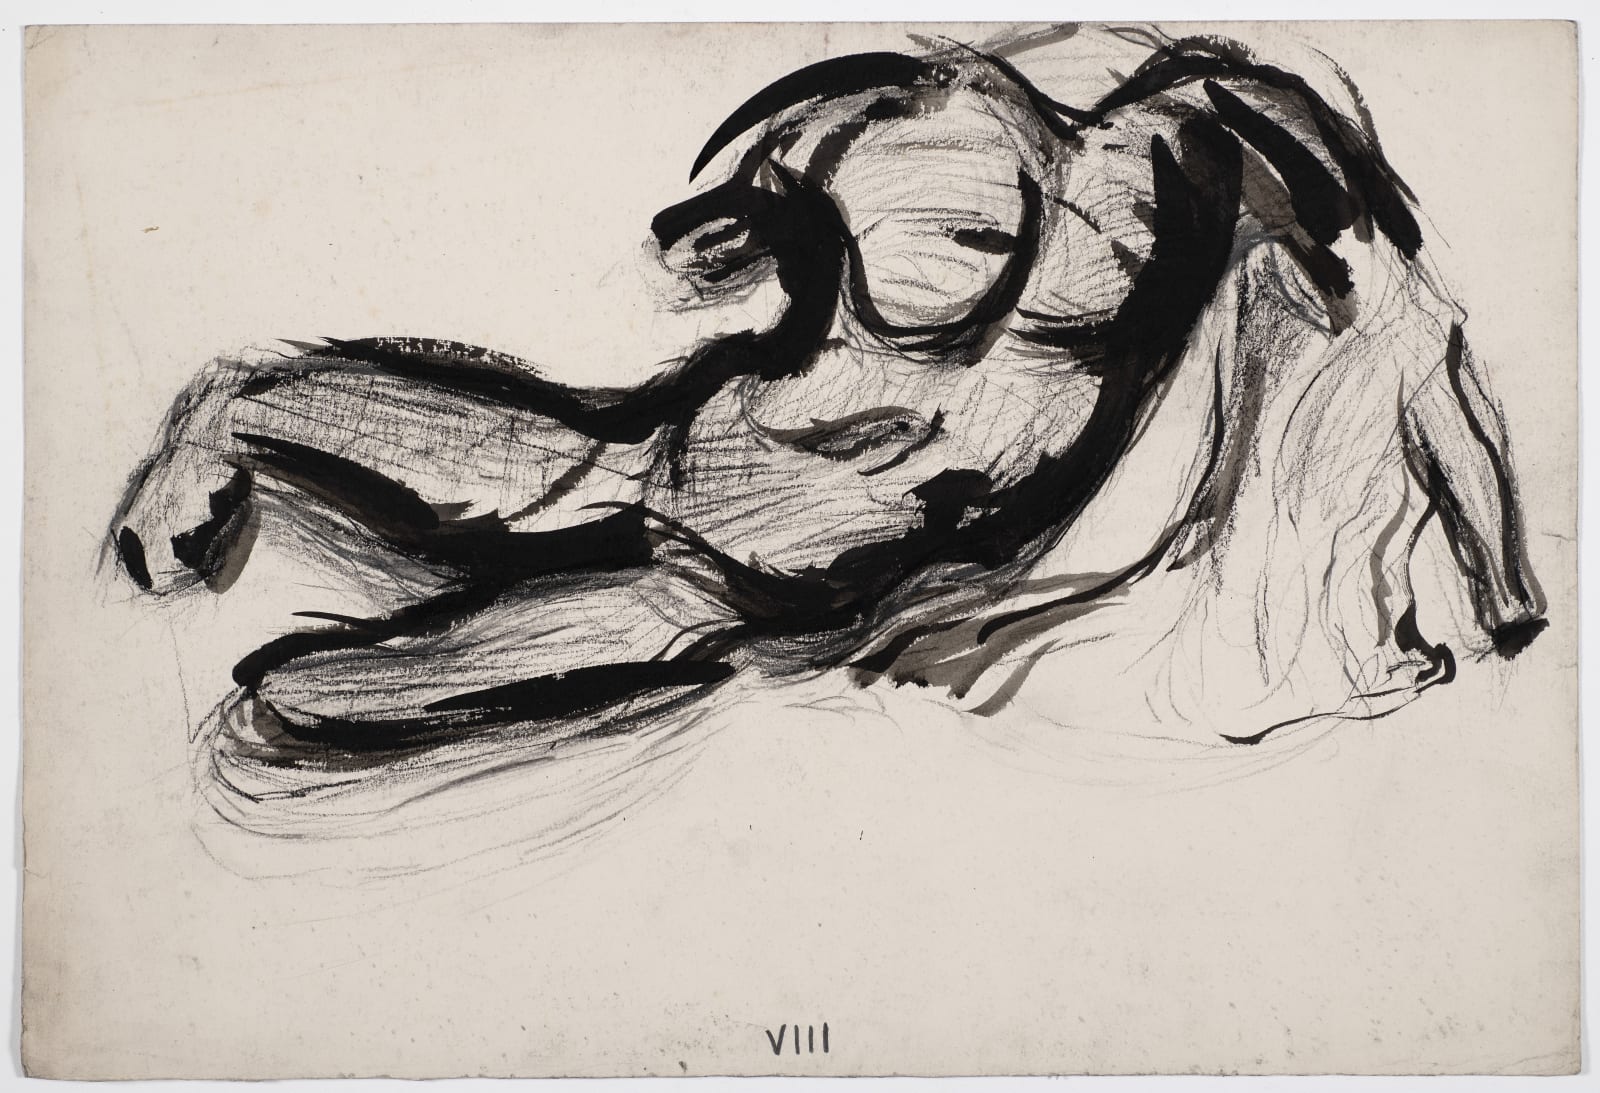 Untitled (Parthenon Figure Study, British Museum), c. 1950 Ink on paper 38 x 56cm The Gustav Metzger Foundation